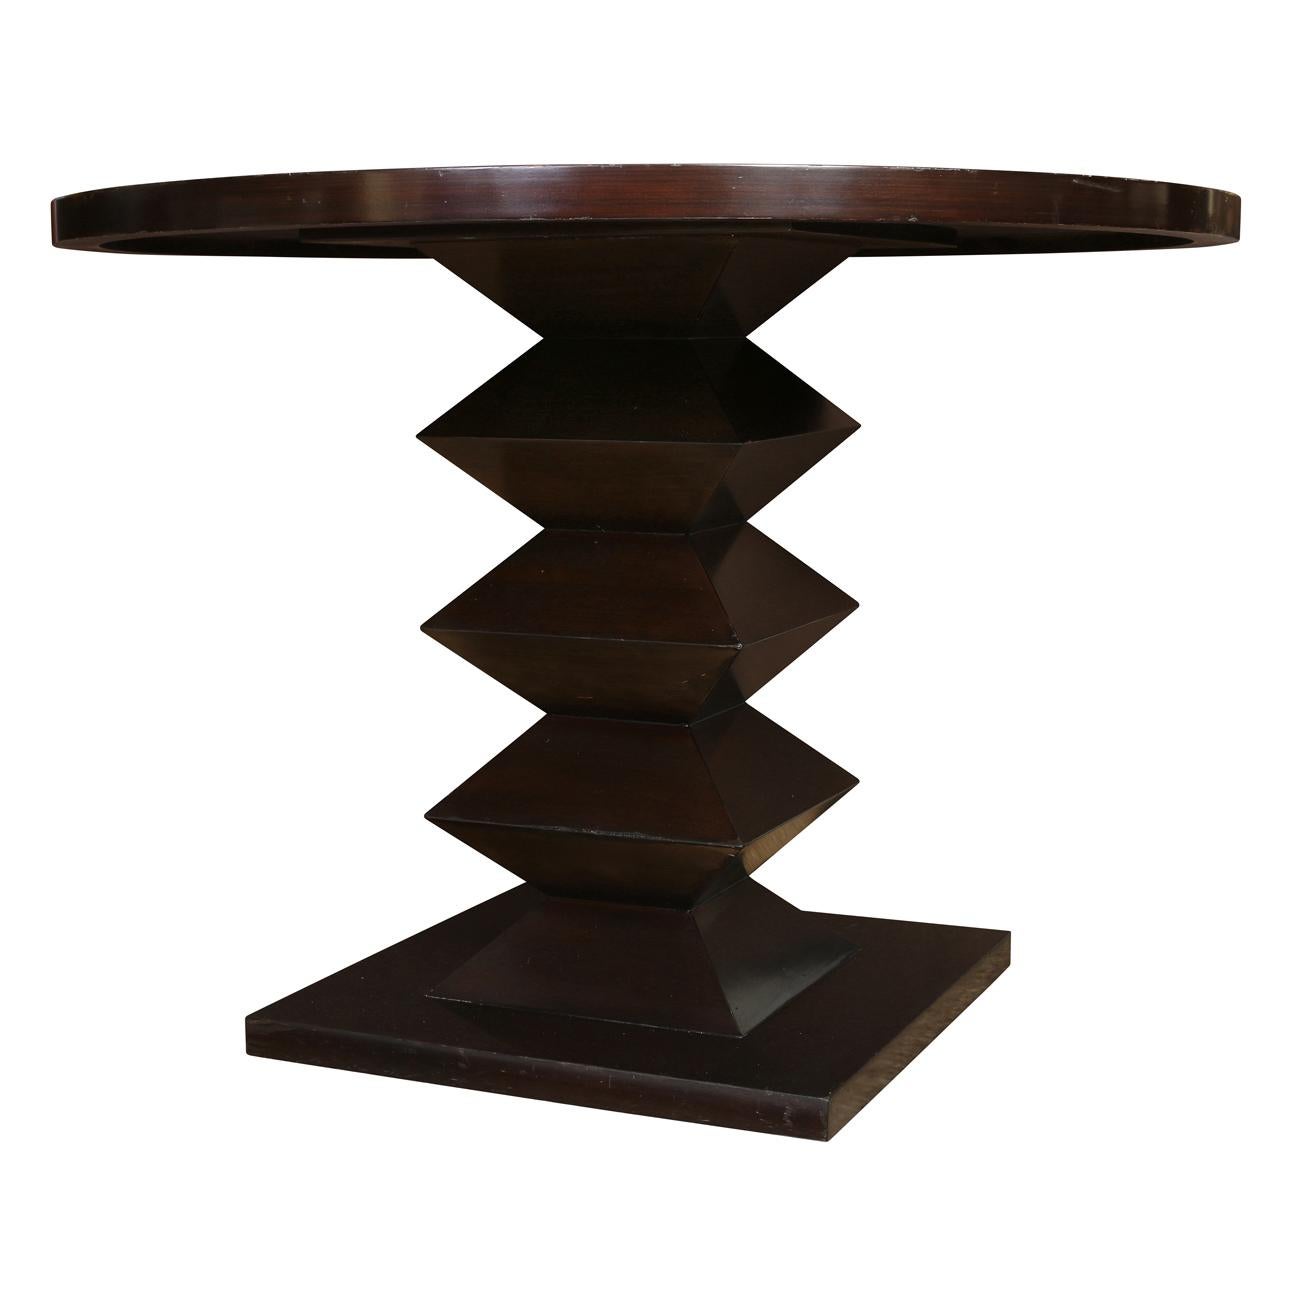 Modern round wood dining or center hall table in dark finish with zig zag pedestal base.